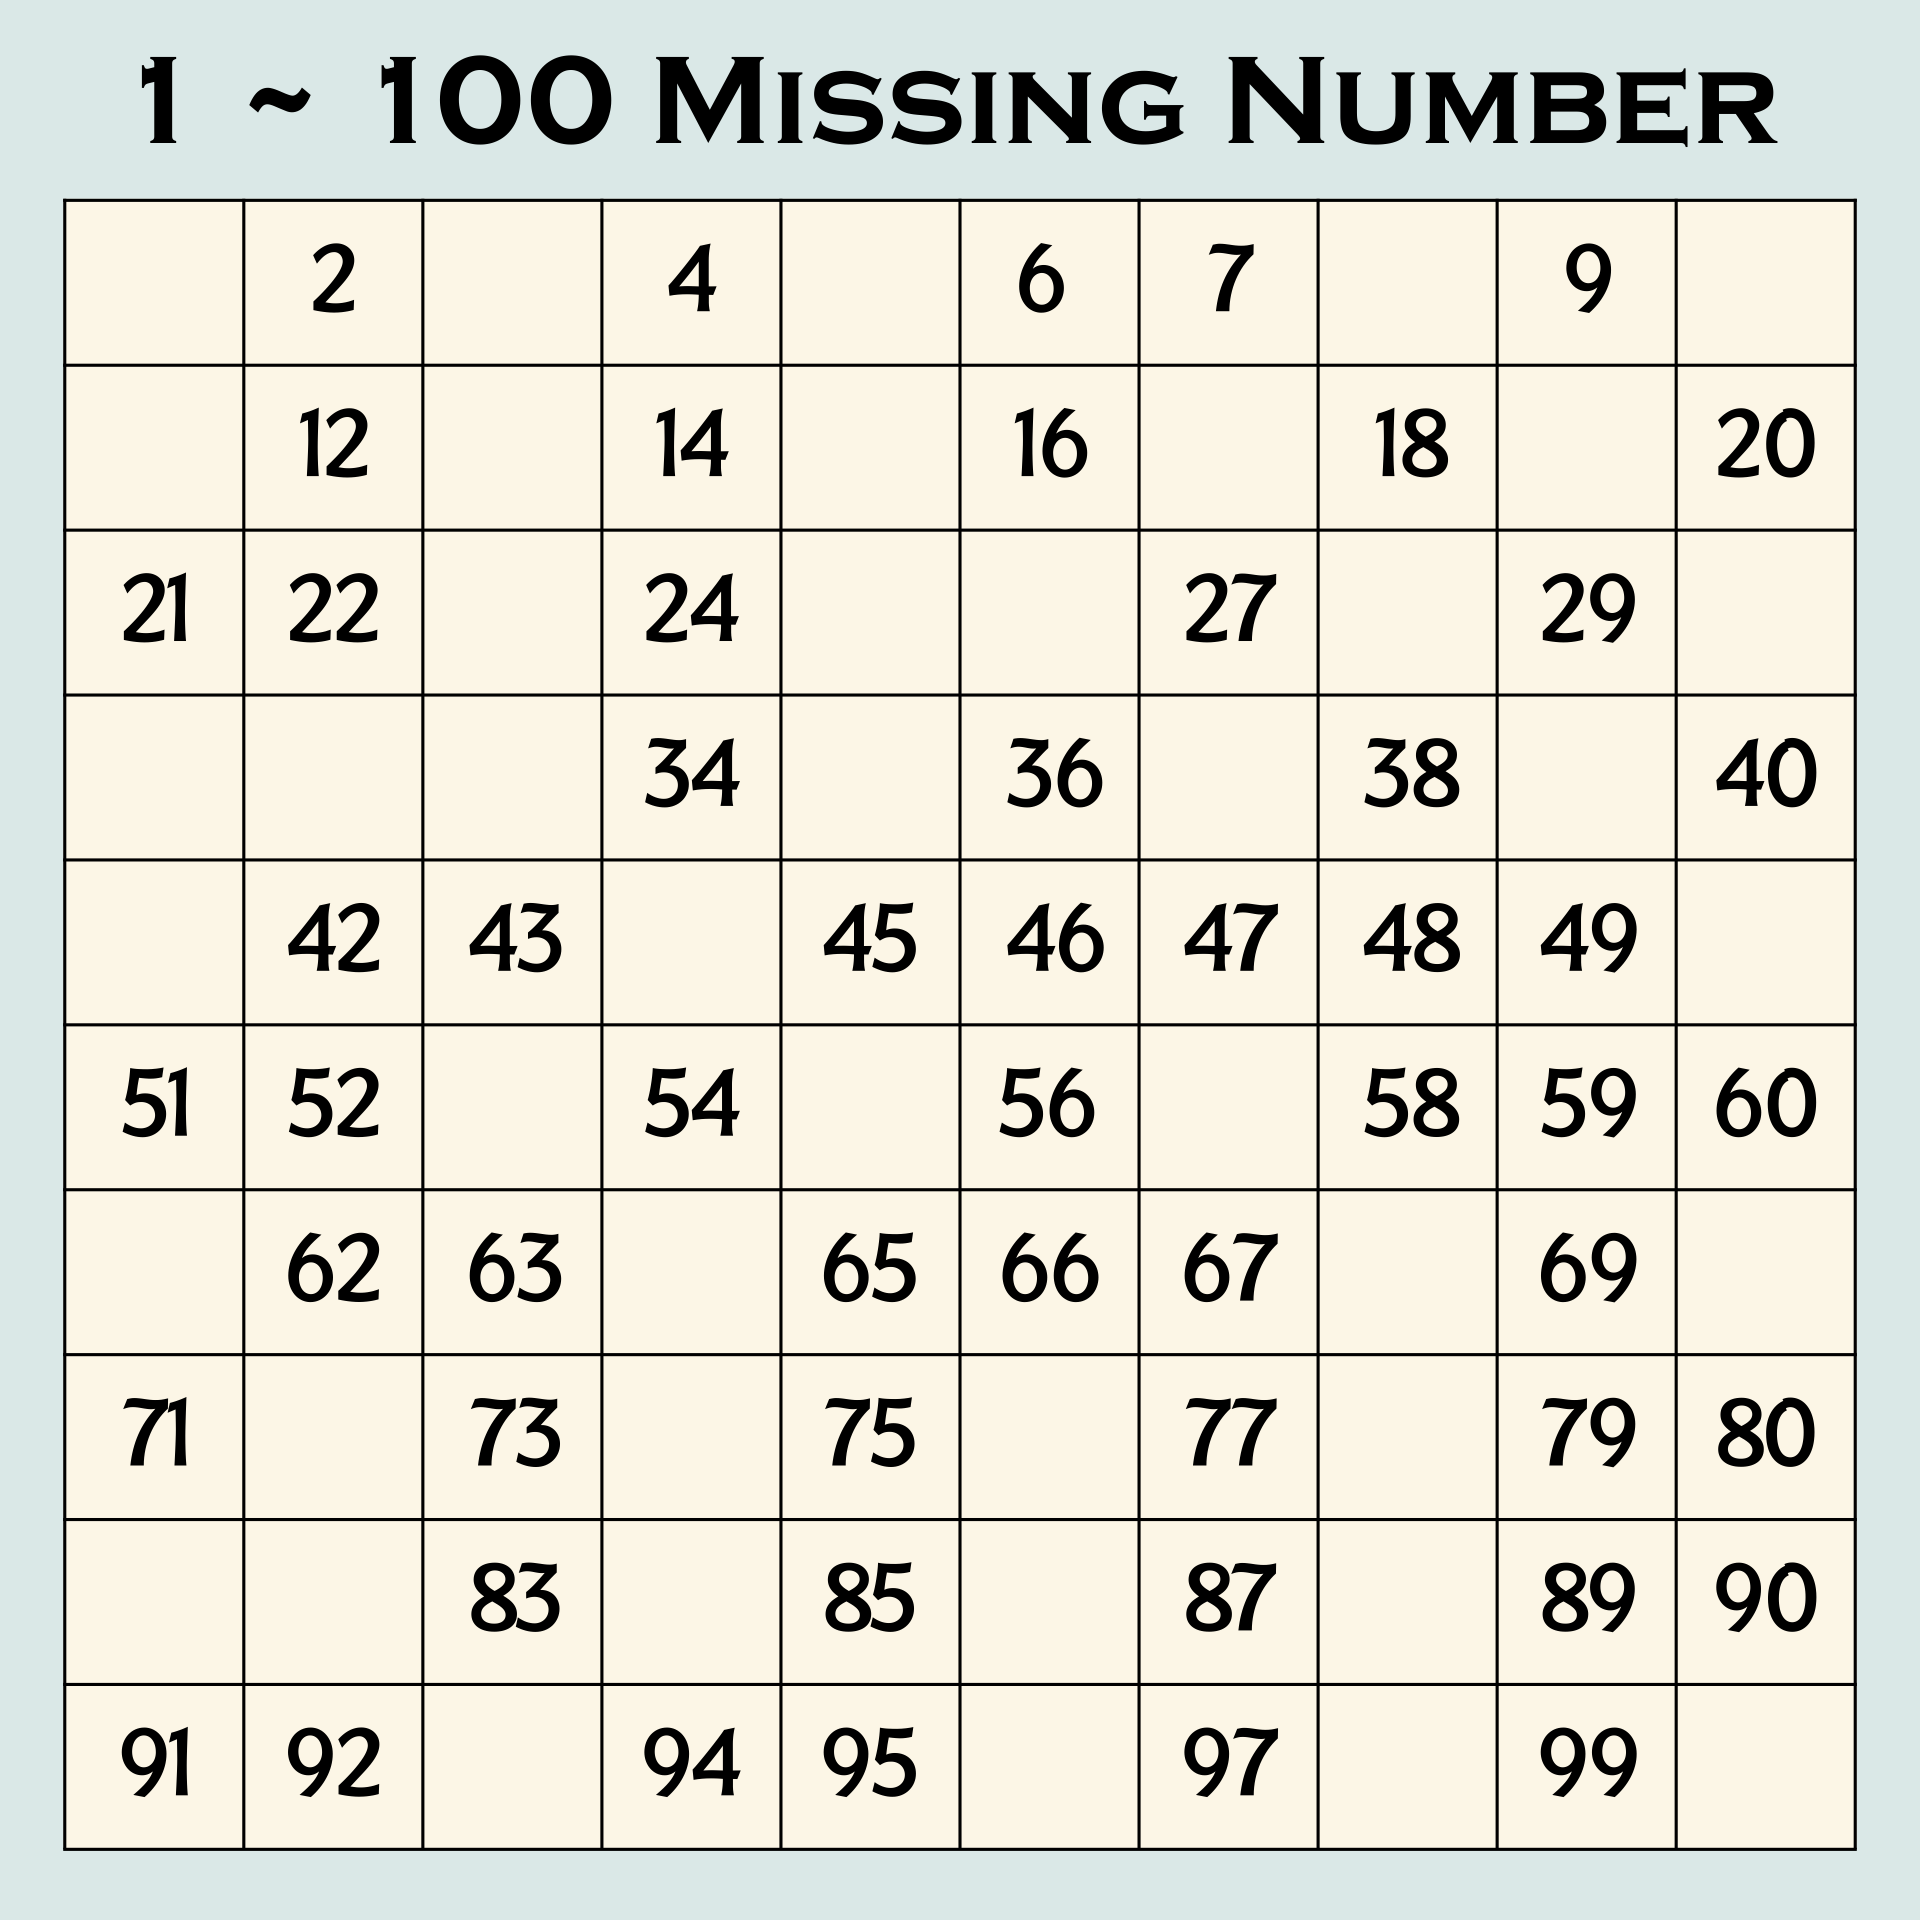 7-best-images-of-missing-number-charts-printable-missing-number-chart-1-50-printable-100